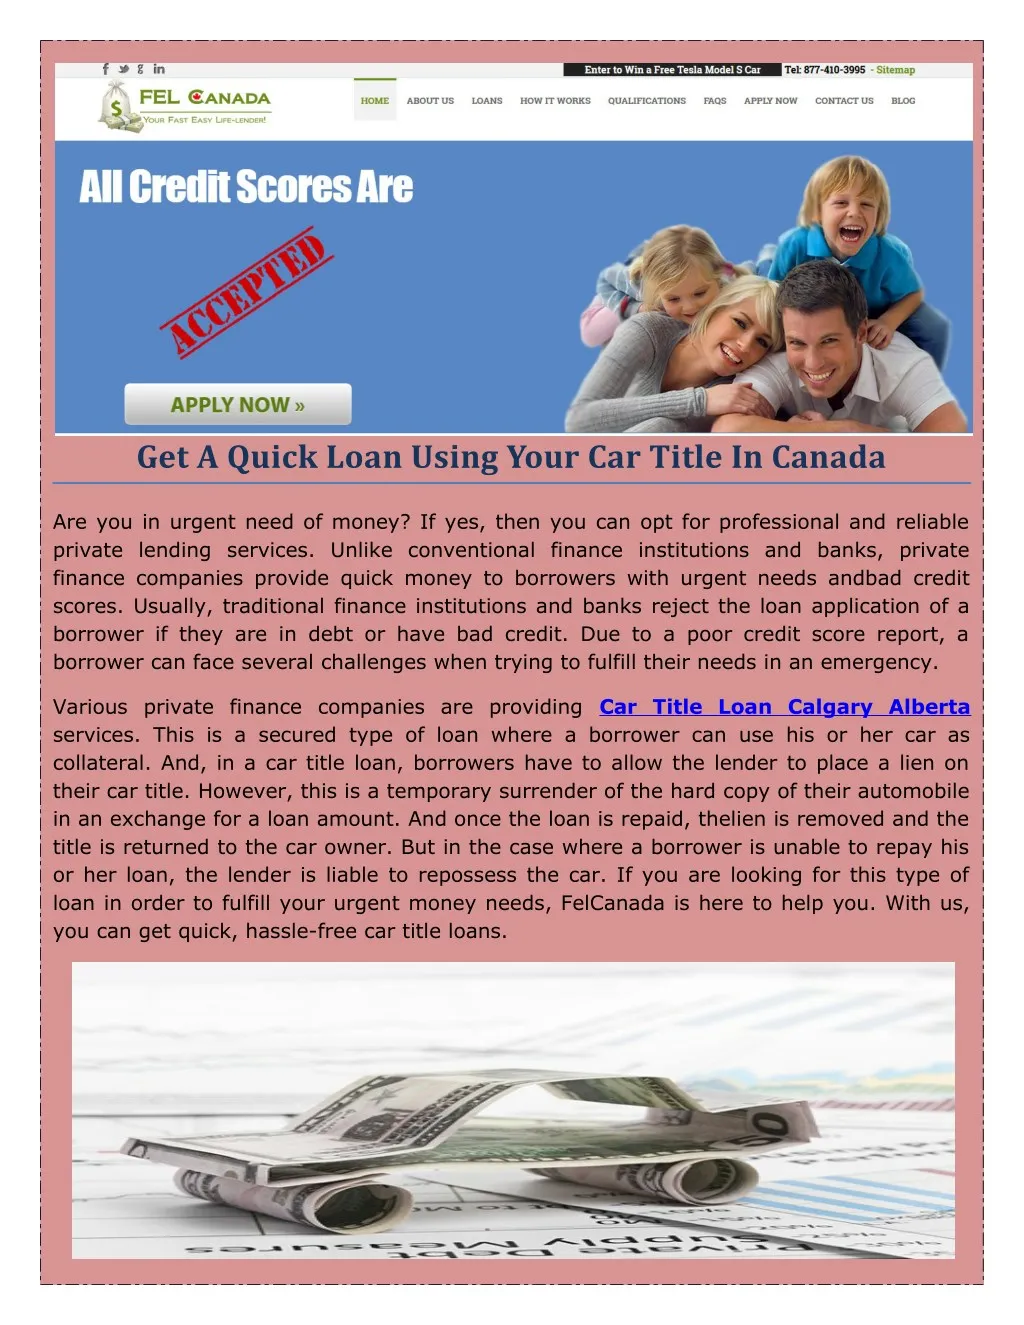 get a quick loan using your car title in canada